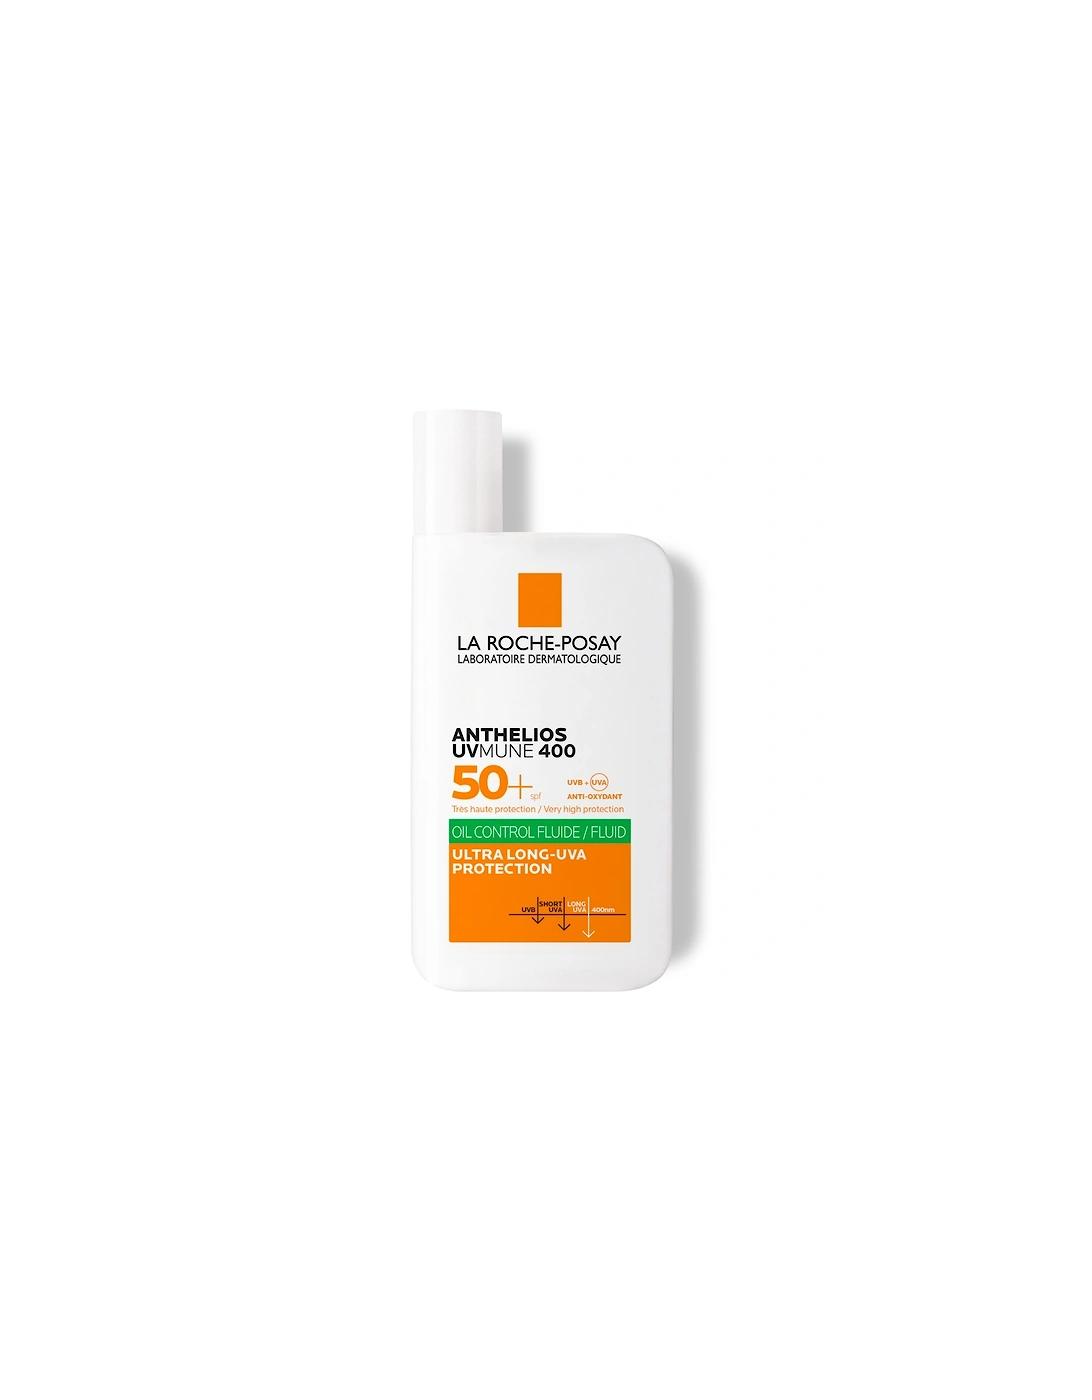 La Roche-Posay Anthelios Oil Control Fluid SPF50+ for Oily Blemish-Prone Skin 50ml, 2 of 1